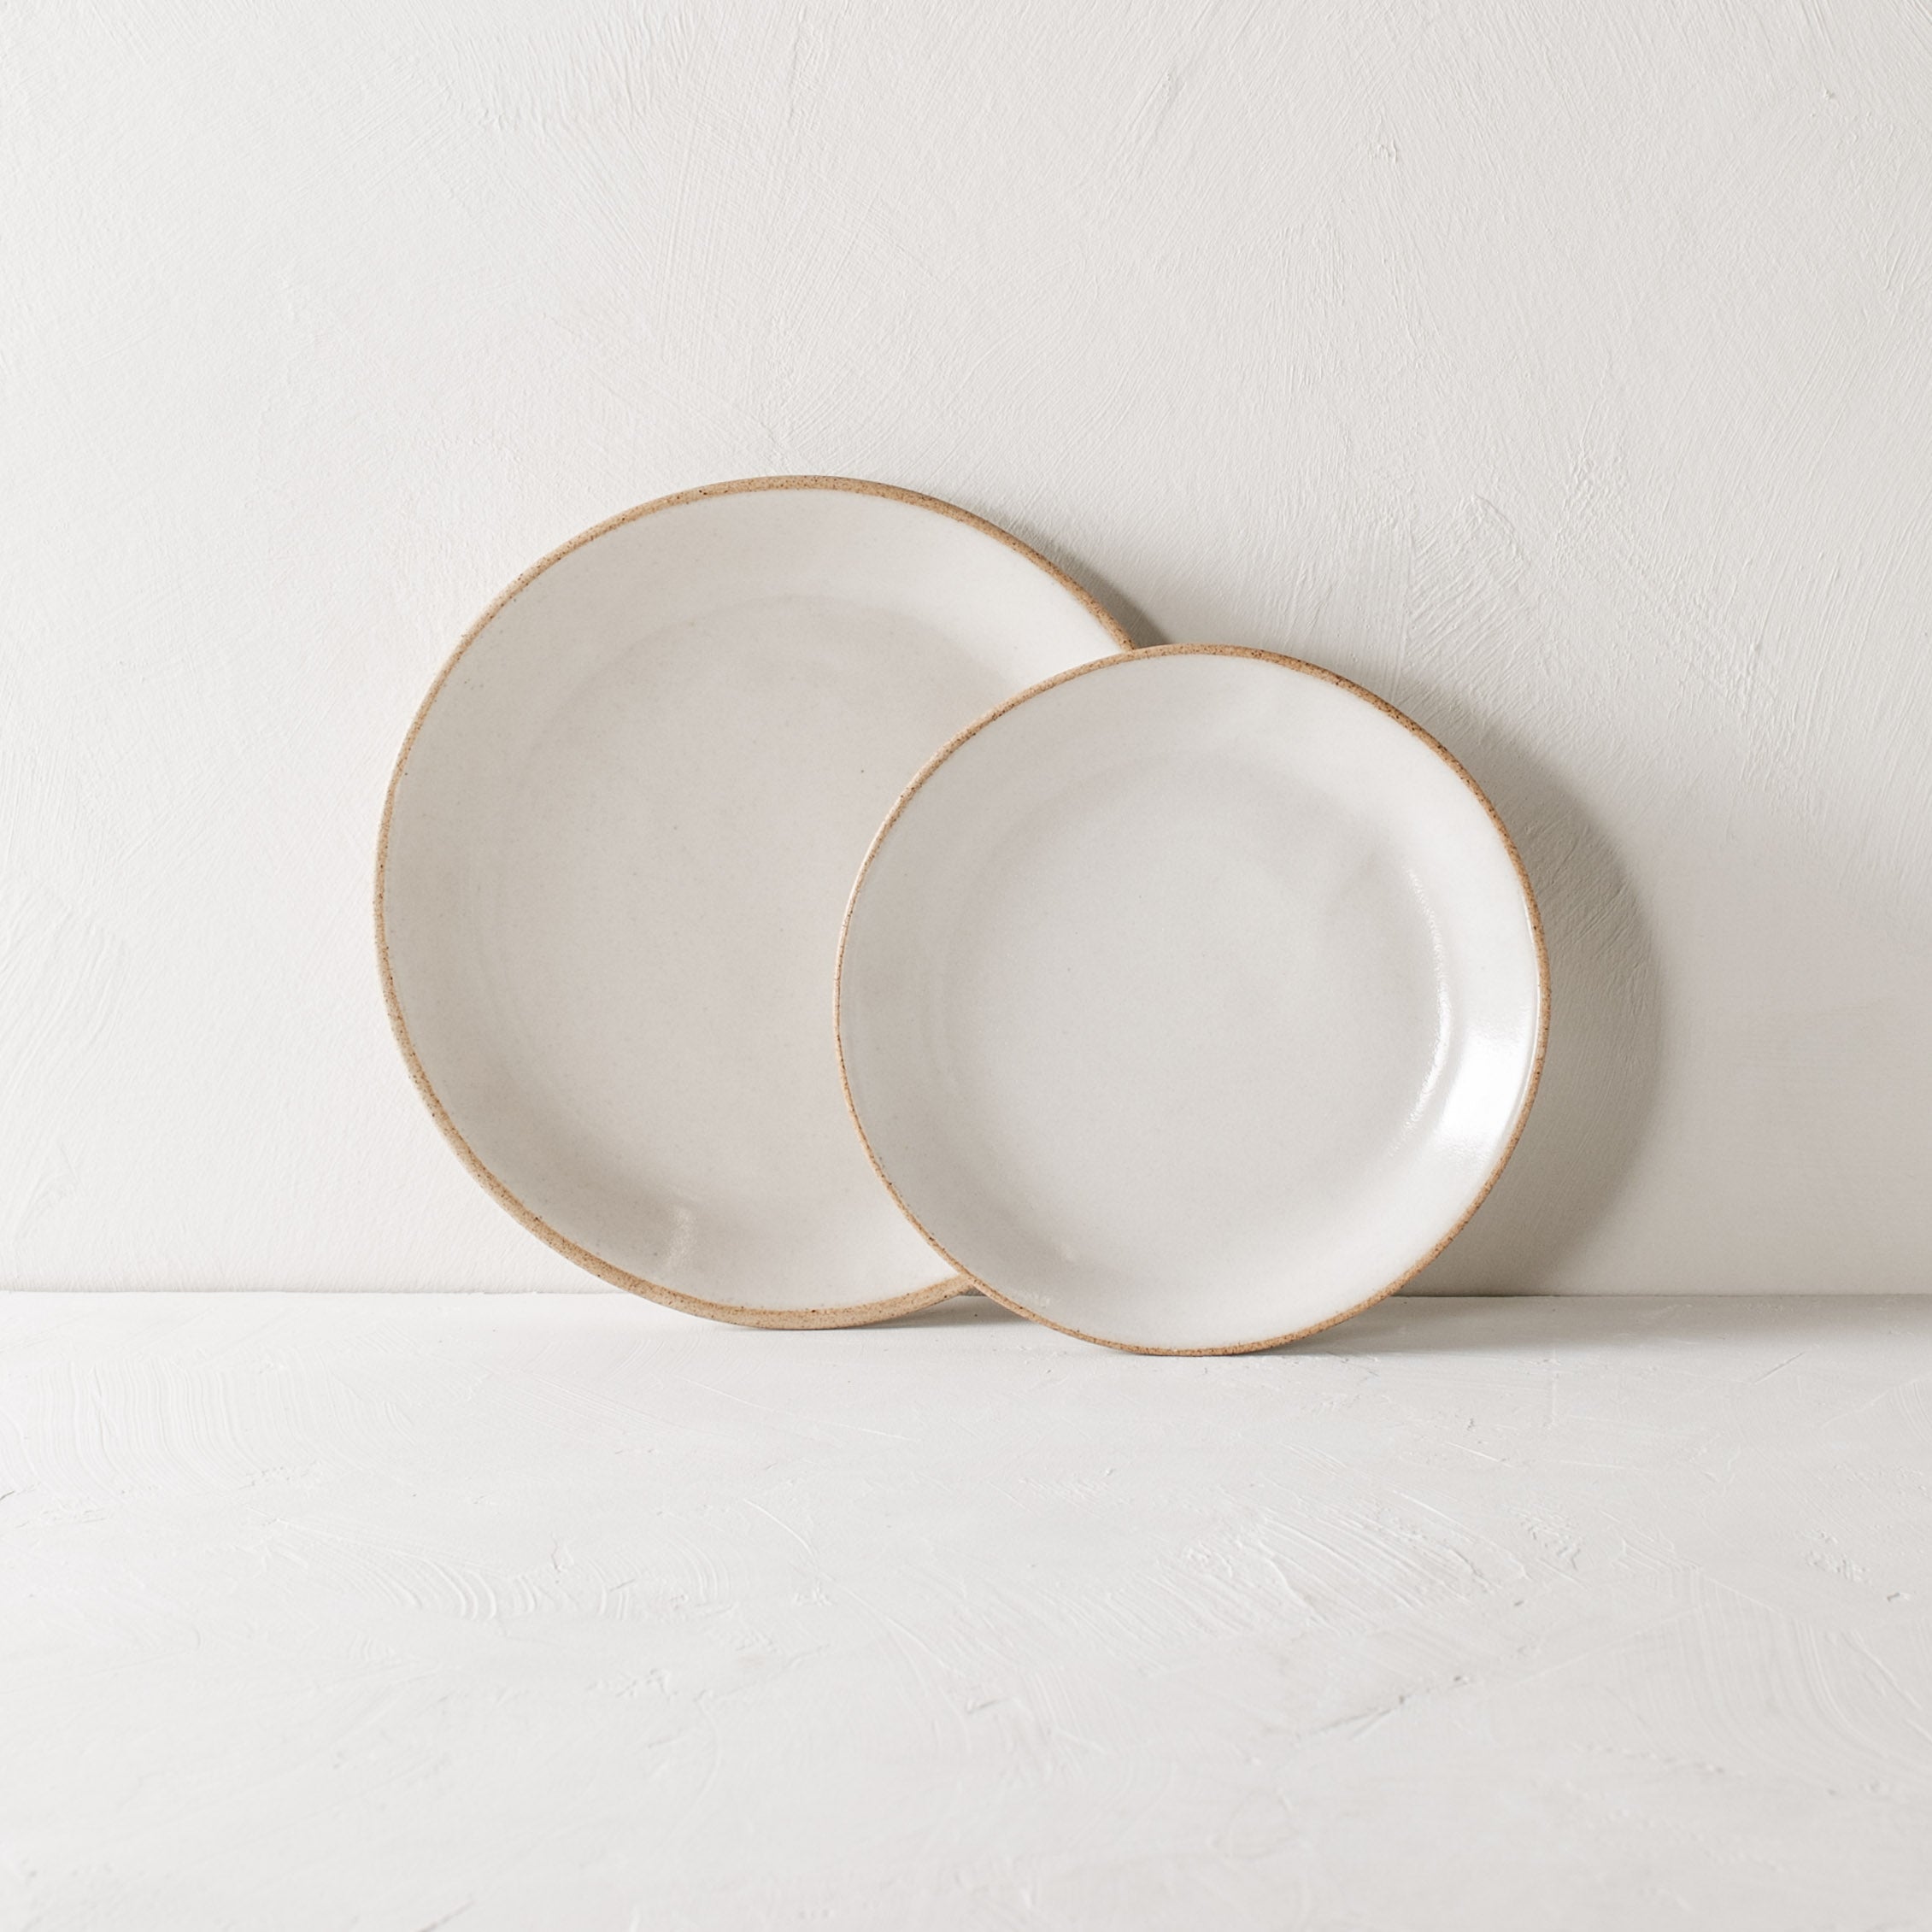 Minimal white ceramic plates against a lime wash wall and white textured tabletop. Plates are different sizes, from left to right: dinner plate, white glaze with an exposed stoneware rime, over lapping the dinner plate is a minimal salad plate identical in look but smaller. Handmade ceramic plates designed and sold by Convivial Production. Kansas City ceramics.